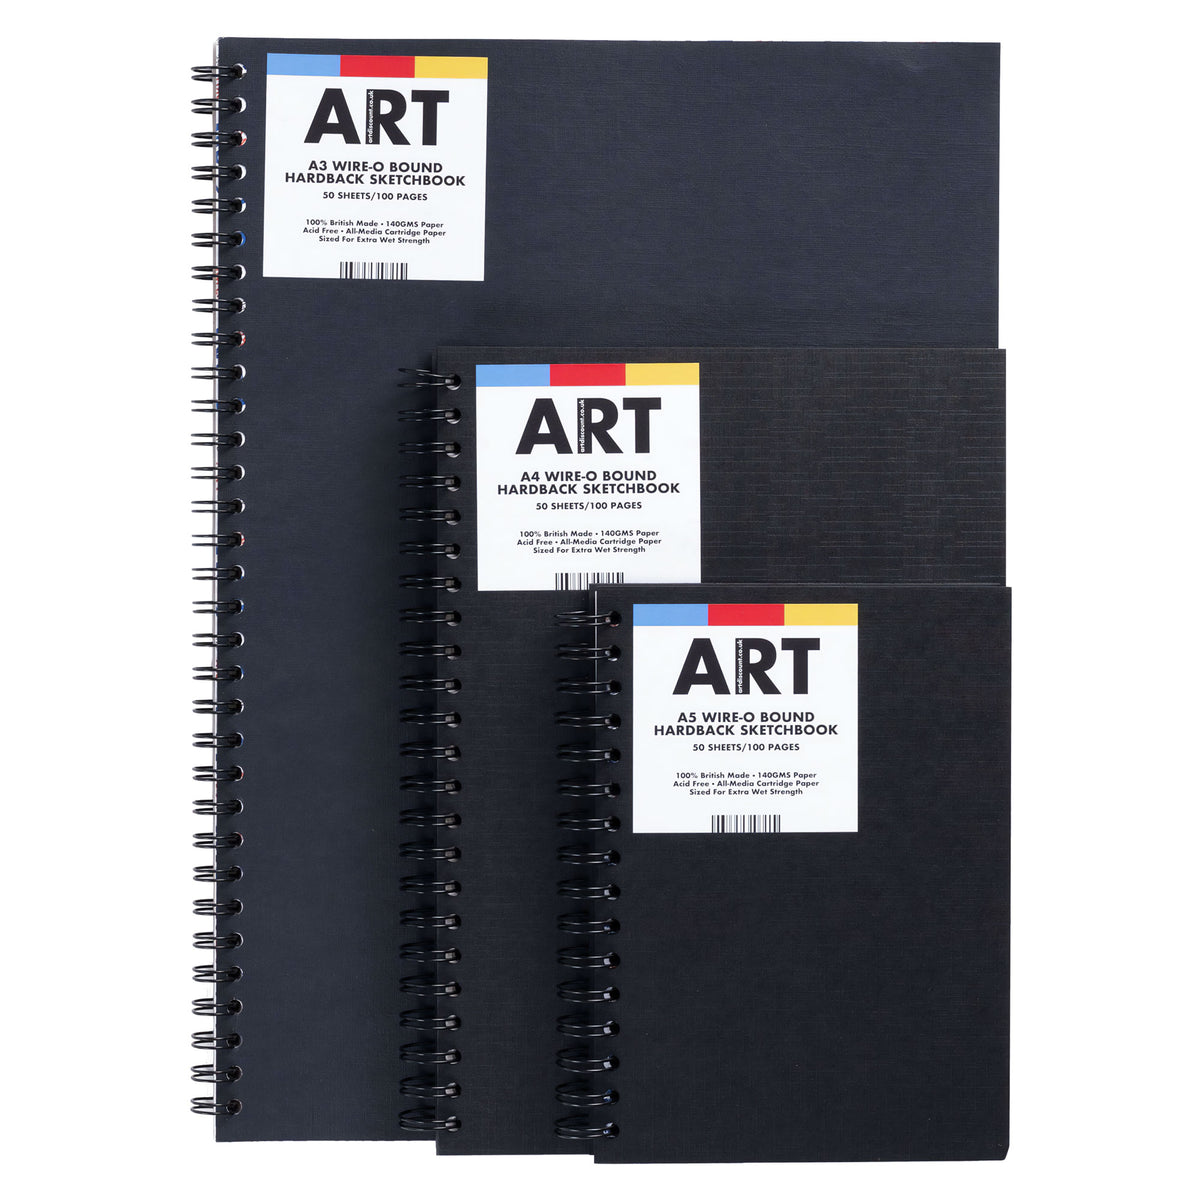 ARTdiscount Wire-o Bound Hardback Sketchbook in sizes A3, A4, and A5